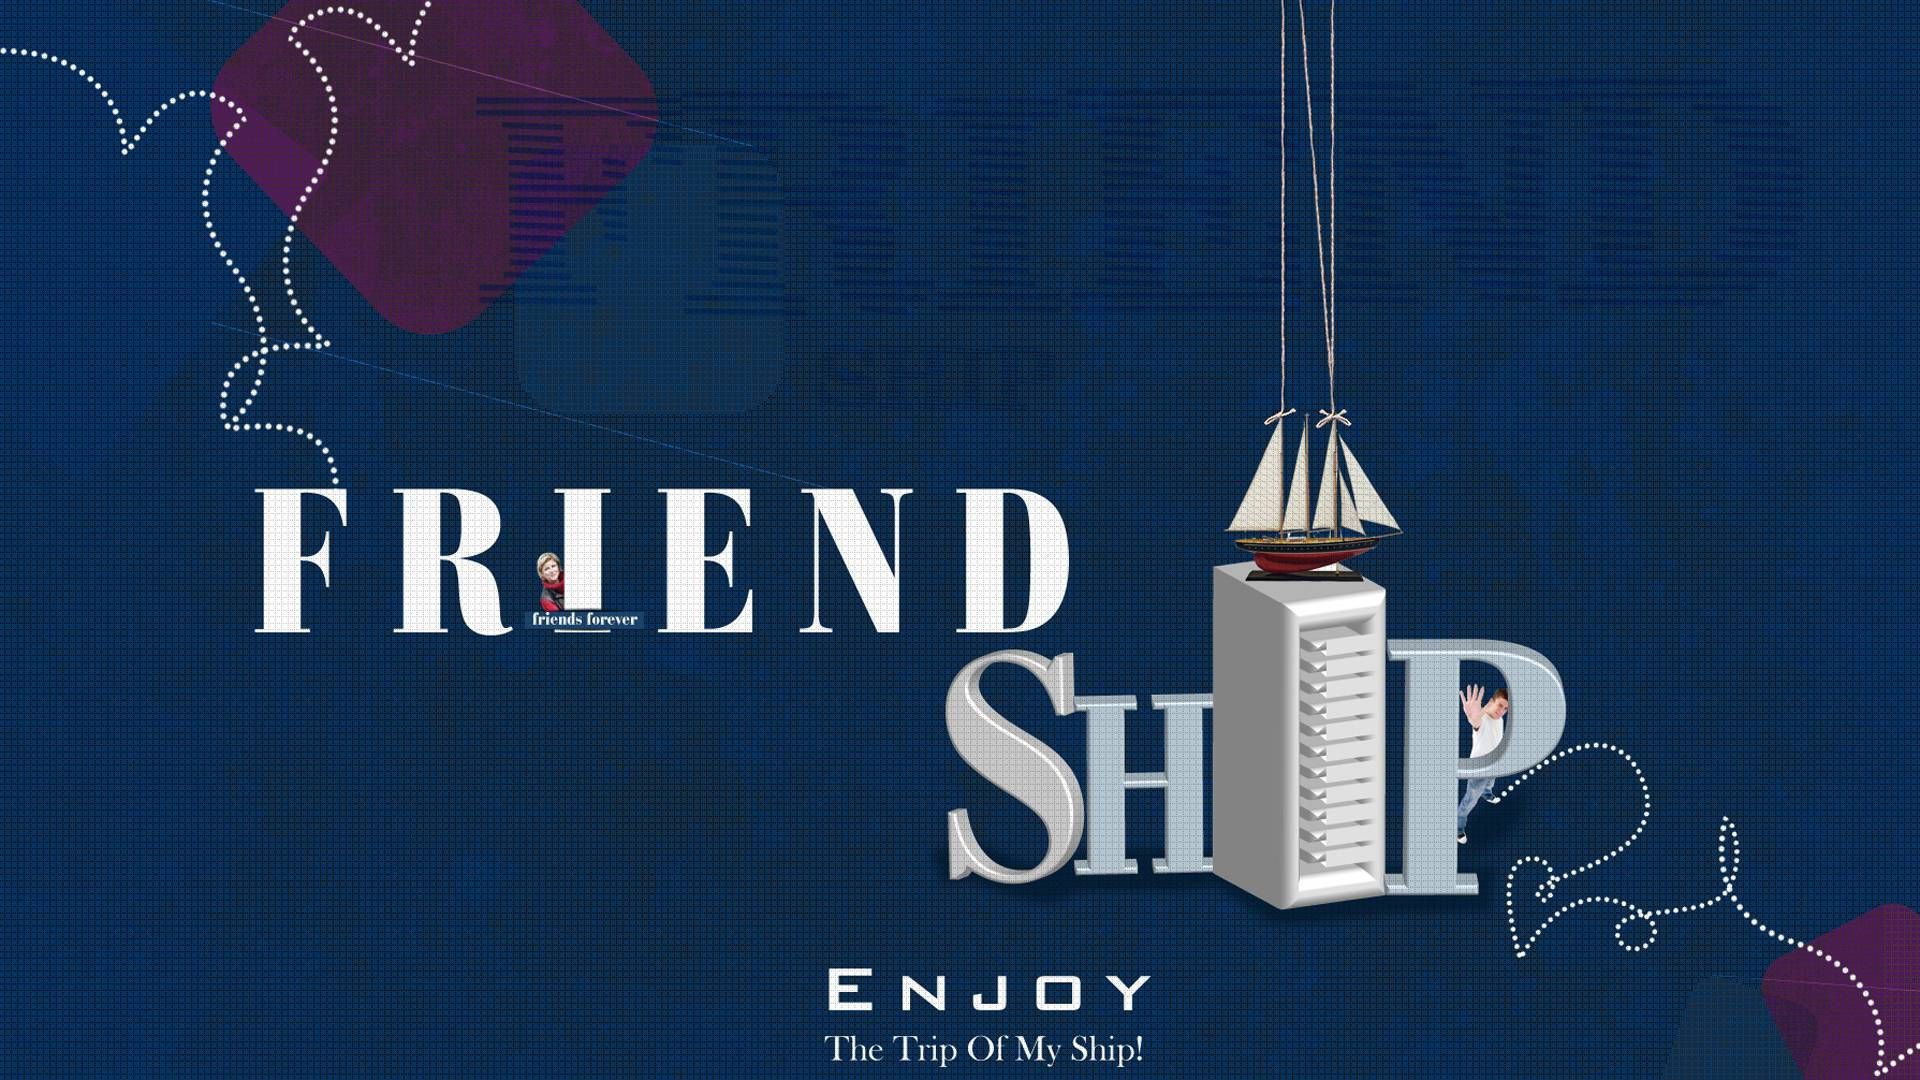 Friendship Poster With A Ship Wallpaper